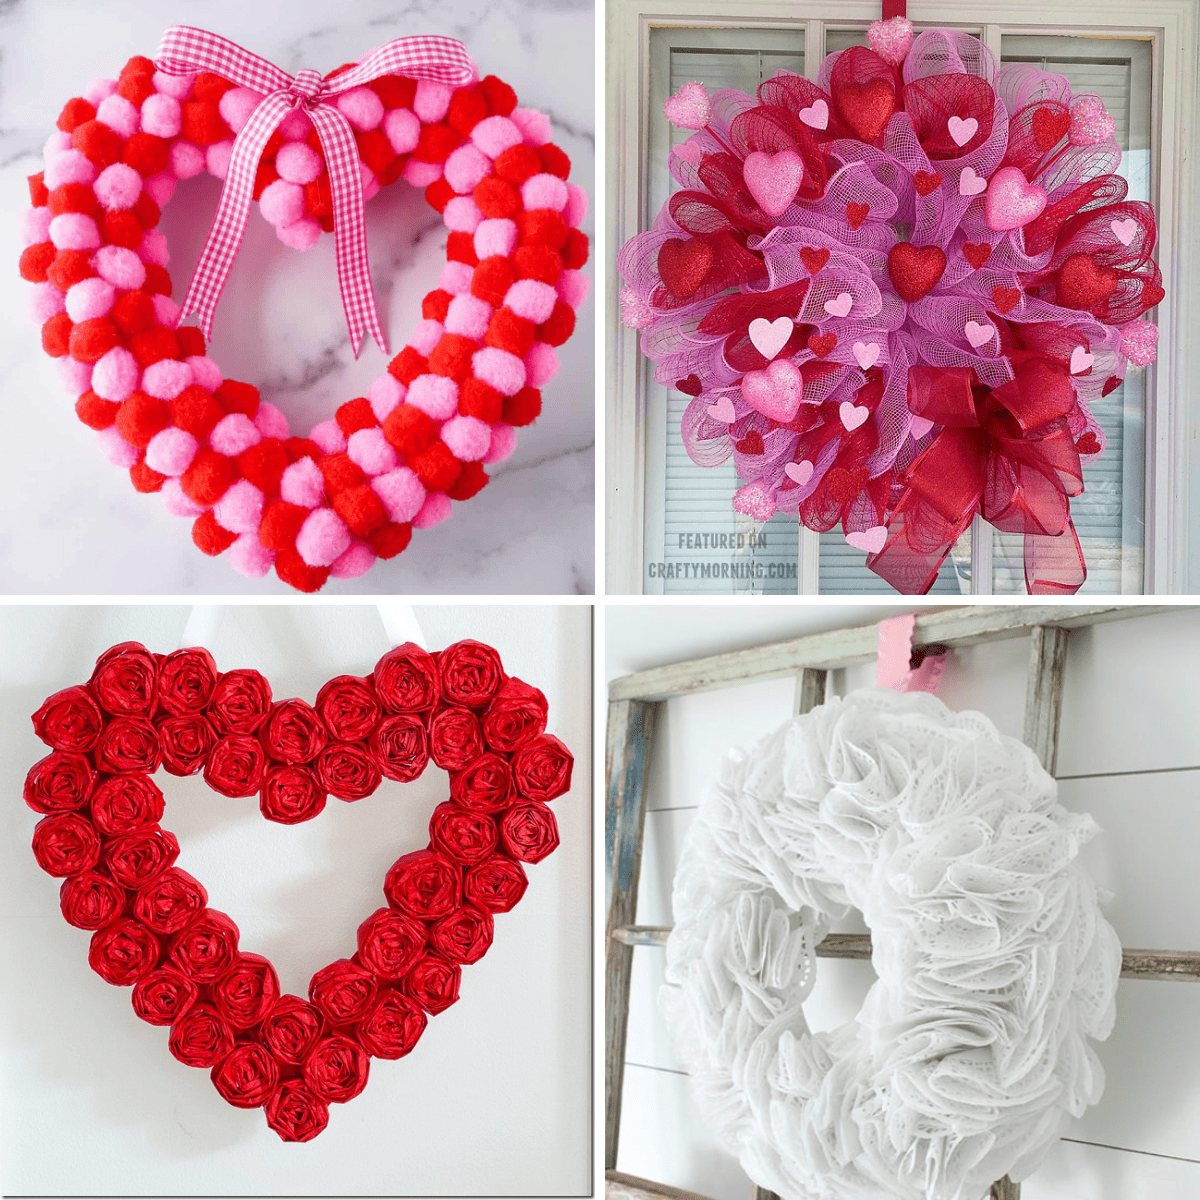 How to make floating hearts with the Dollar Tree foam hearts